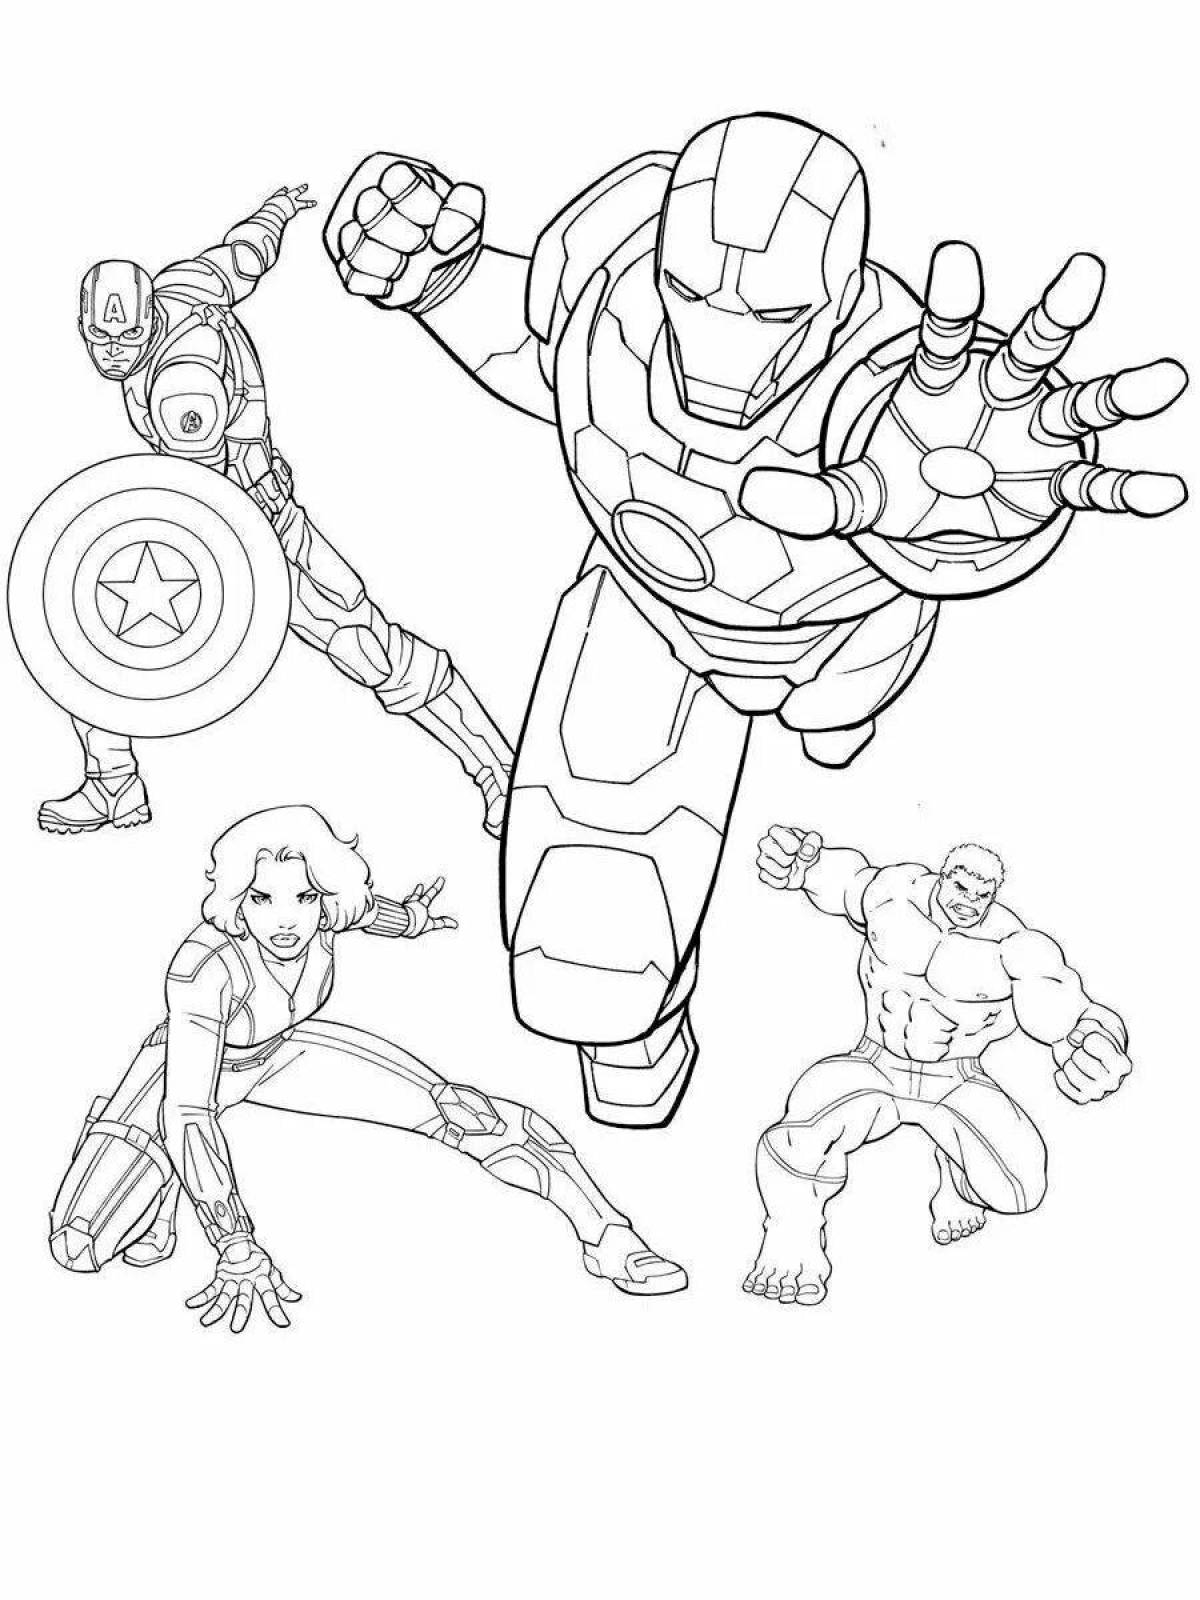 Marvel avengers adorable coloring book